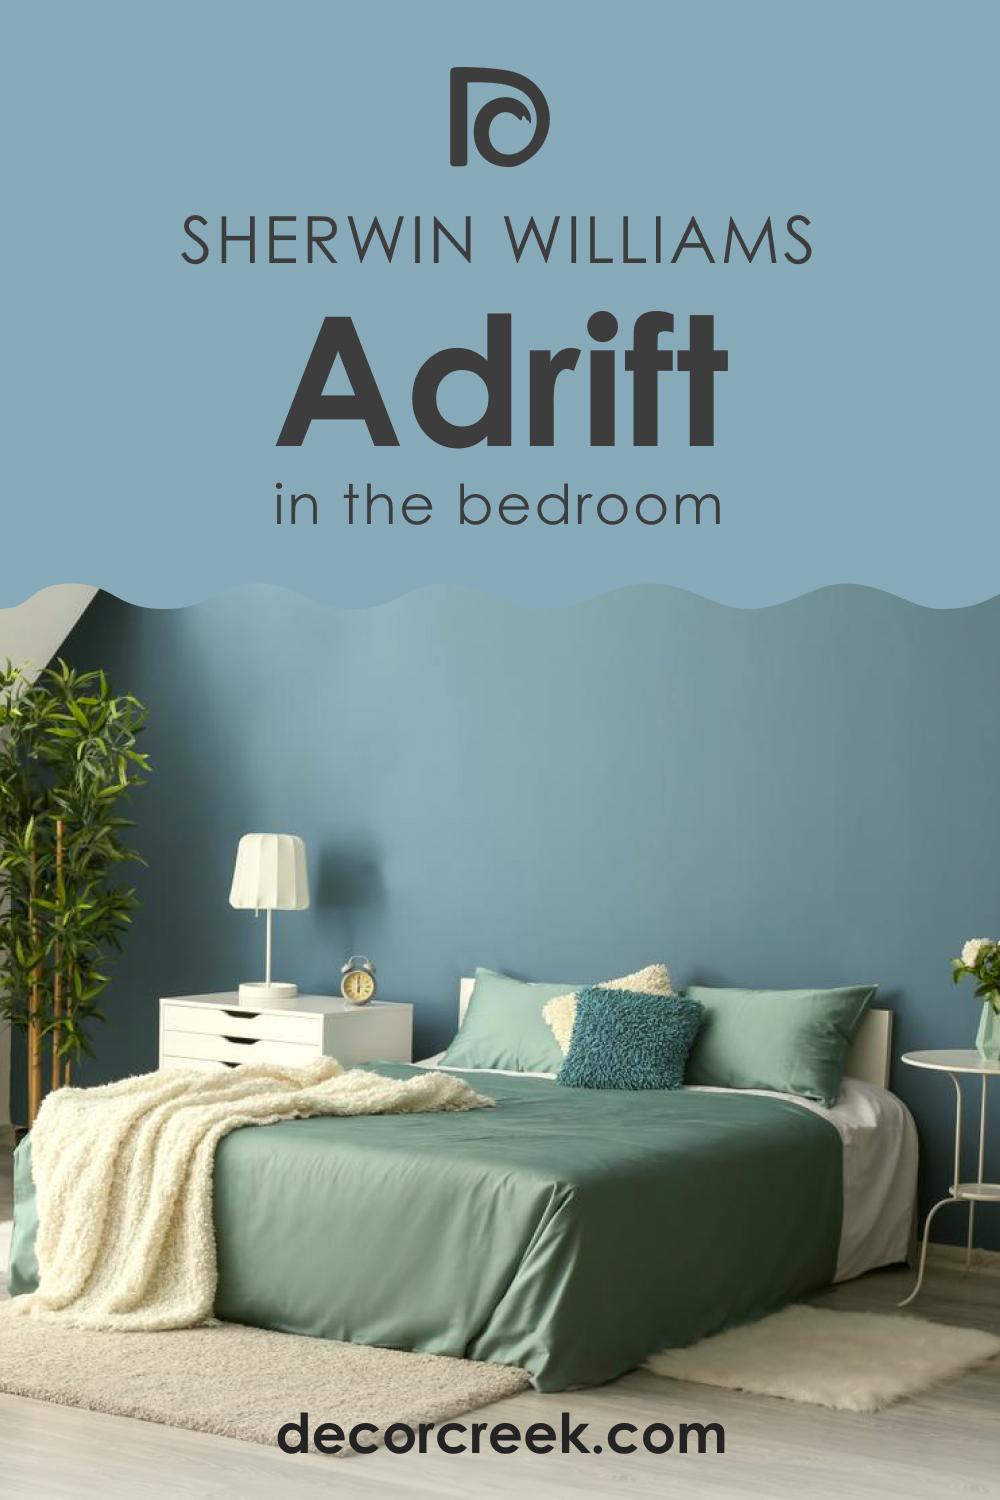 How to Use SW 7608 Adrift in the Bedroom?